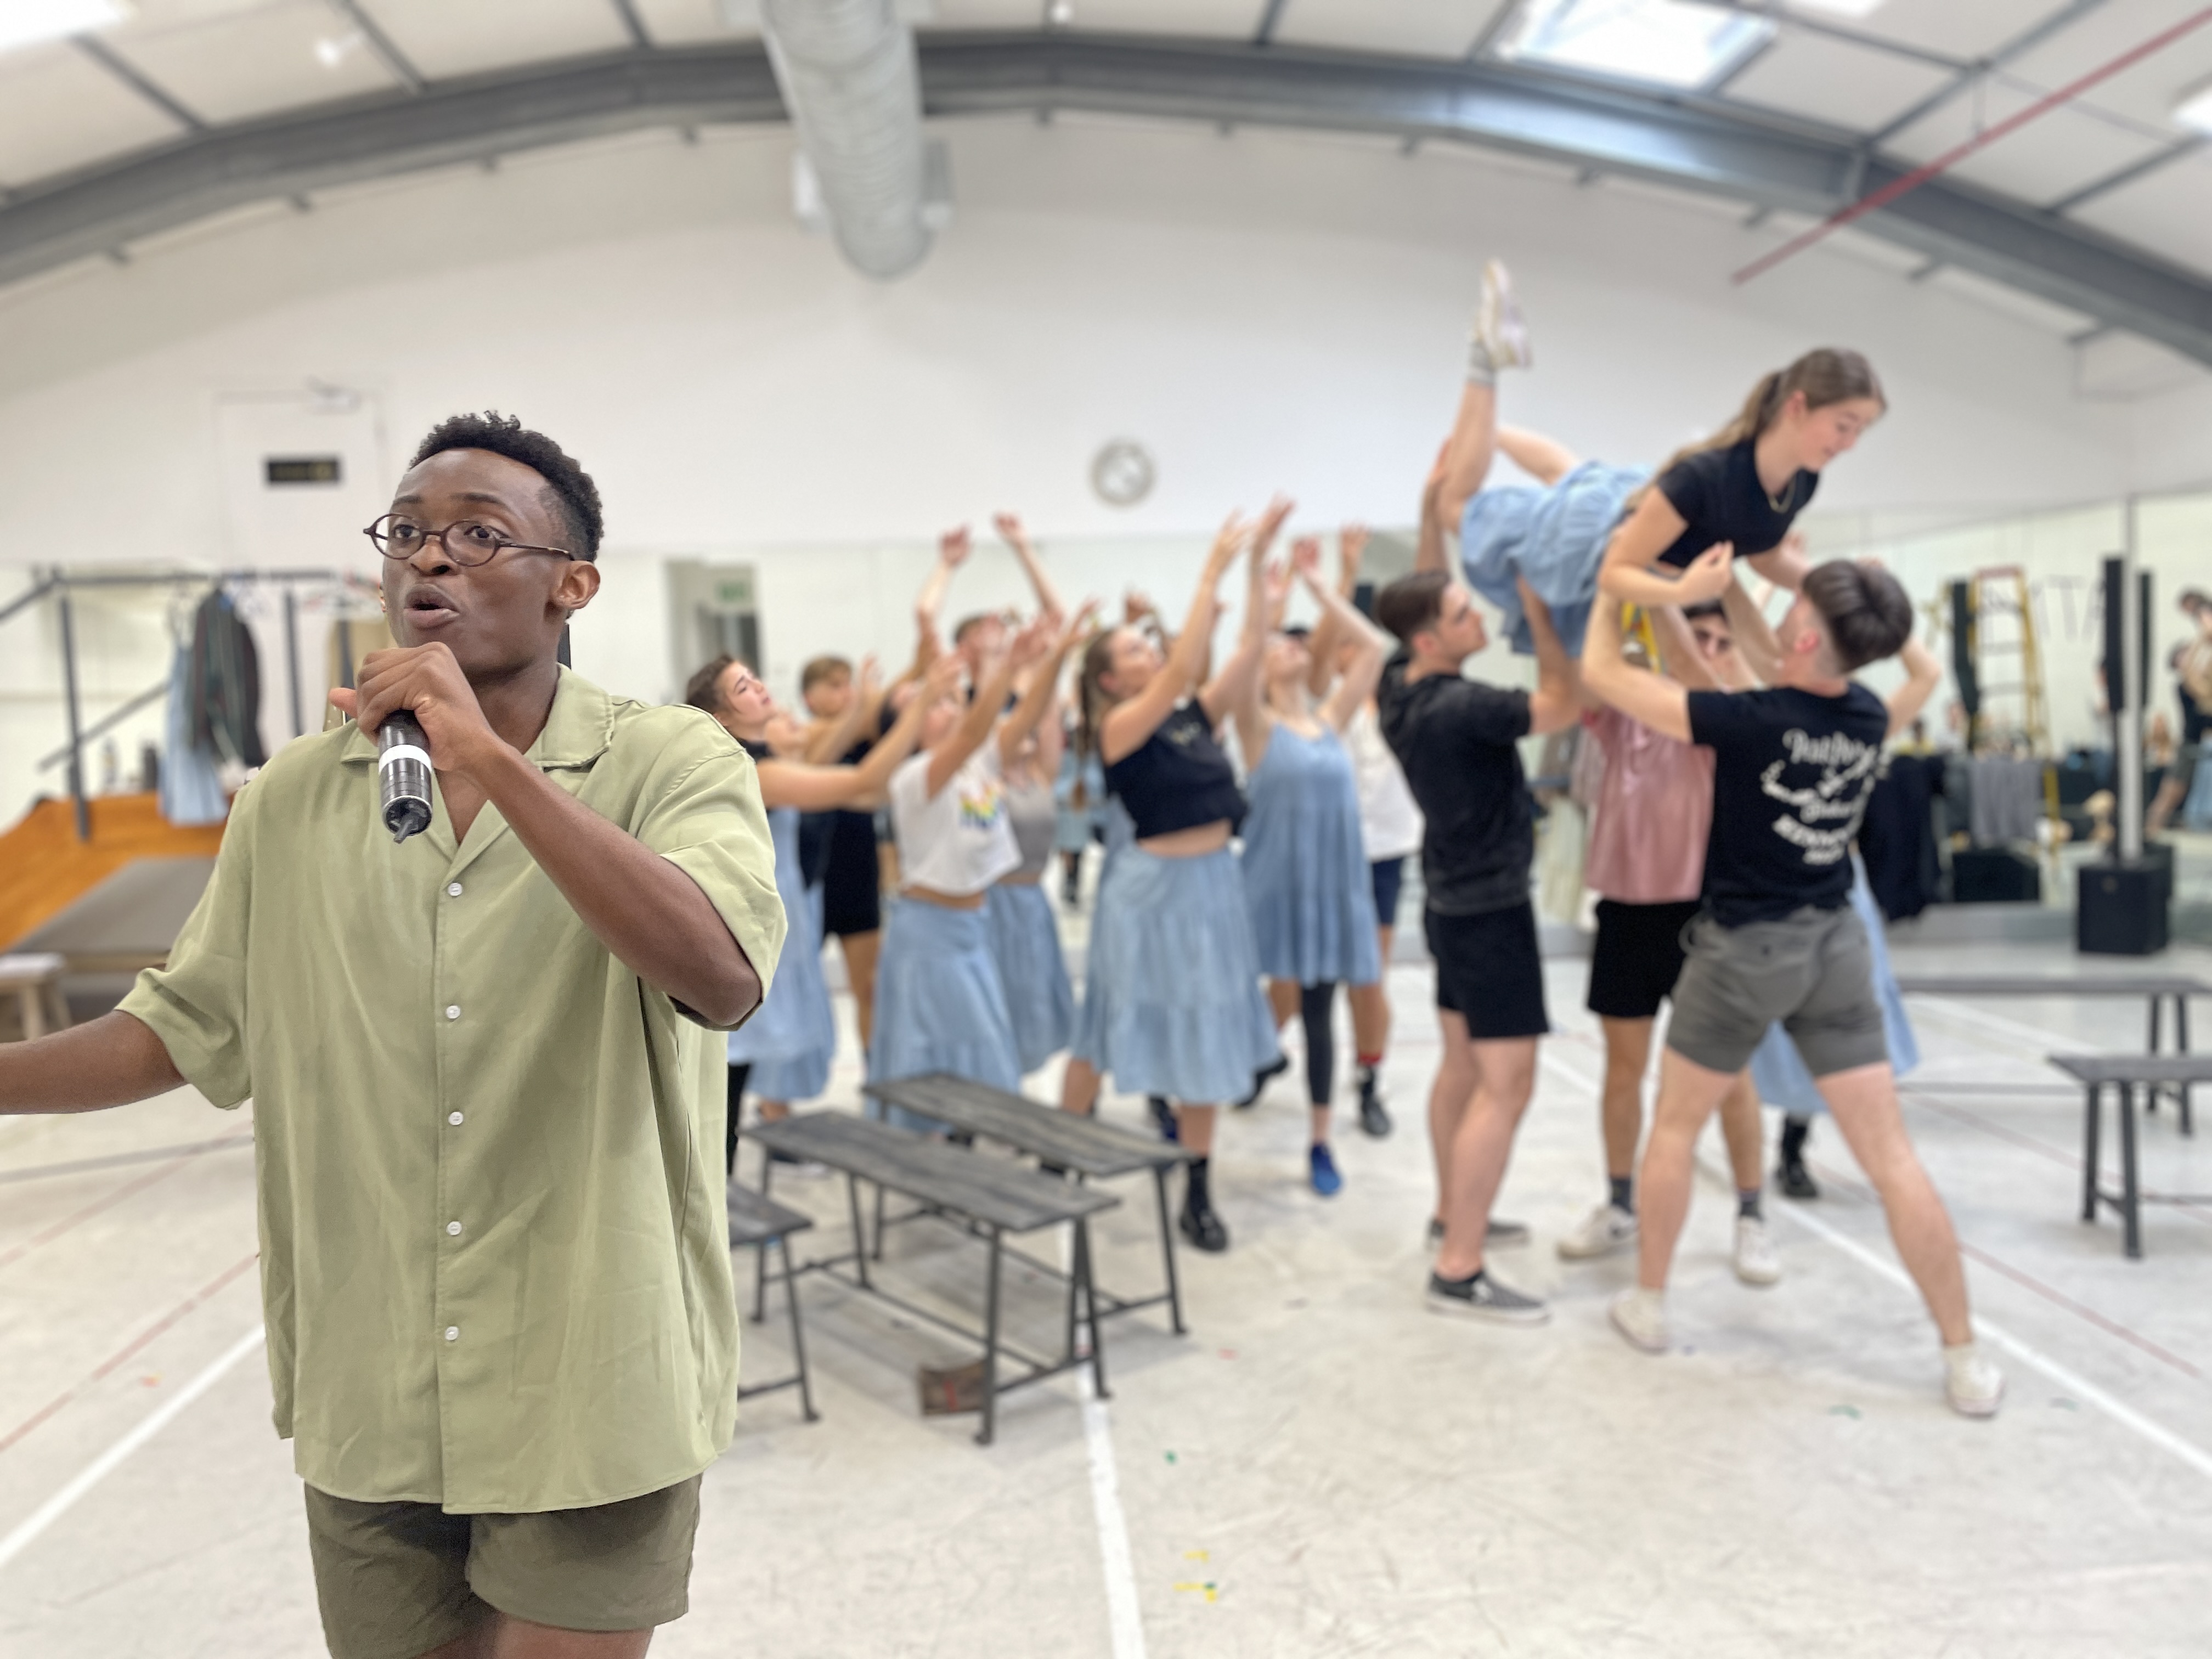 Austin Tshikosi sings while other cast members dance during a rehearsal of 'Spring Awakening'. Image: Duane Alexander